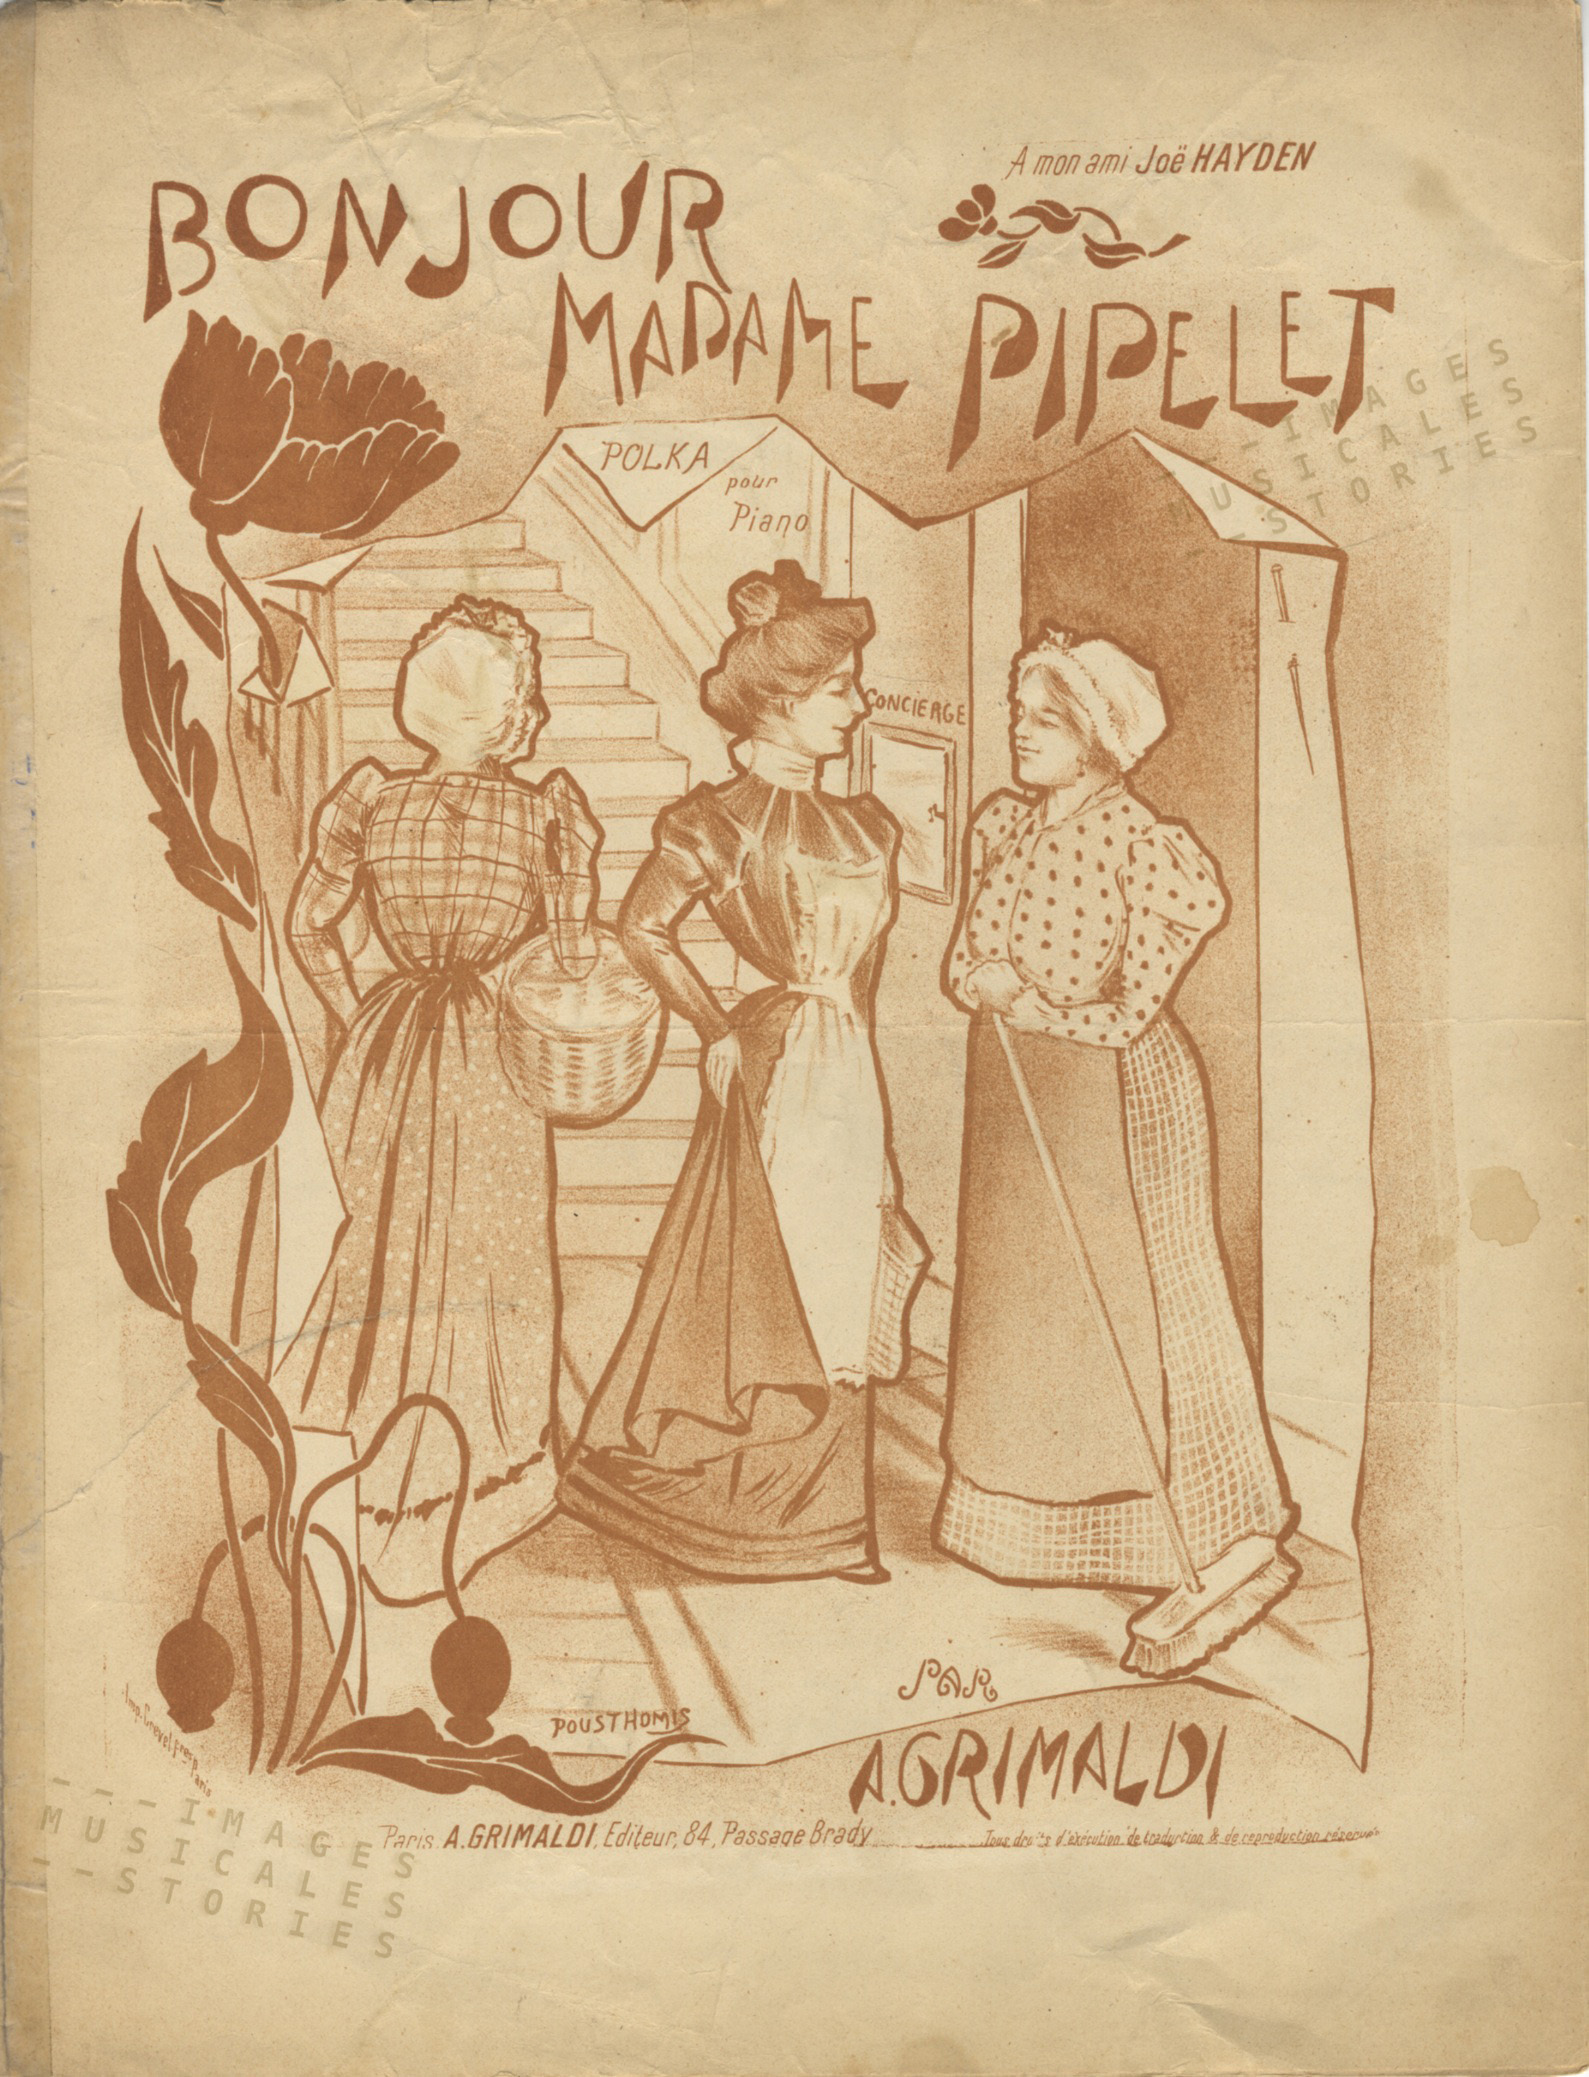 Bonjour Madame Pipelet, cover illustrated by Pousthomis